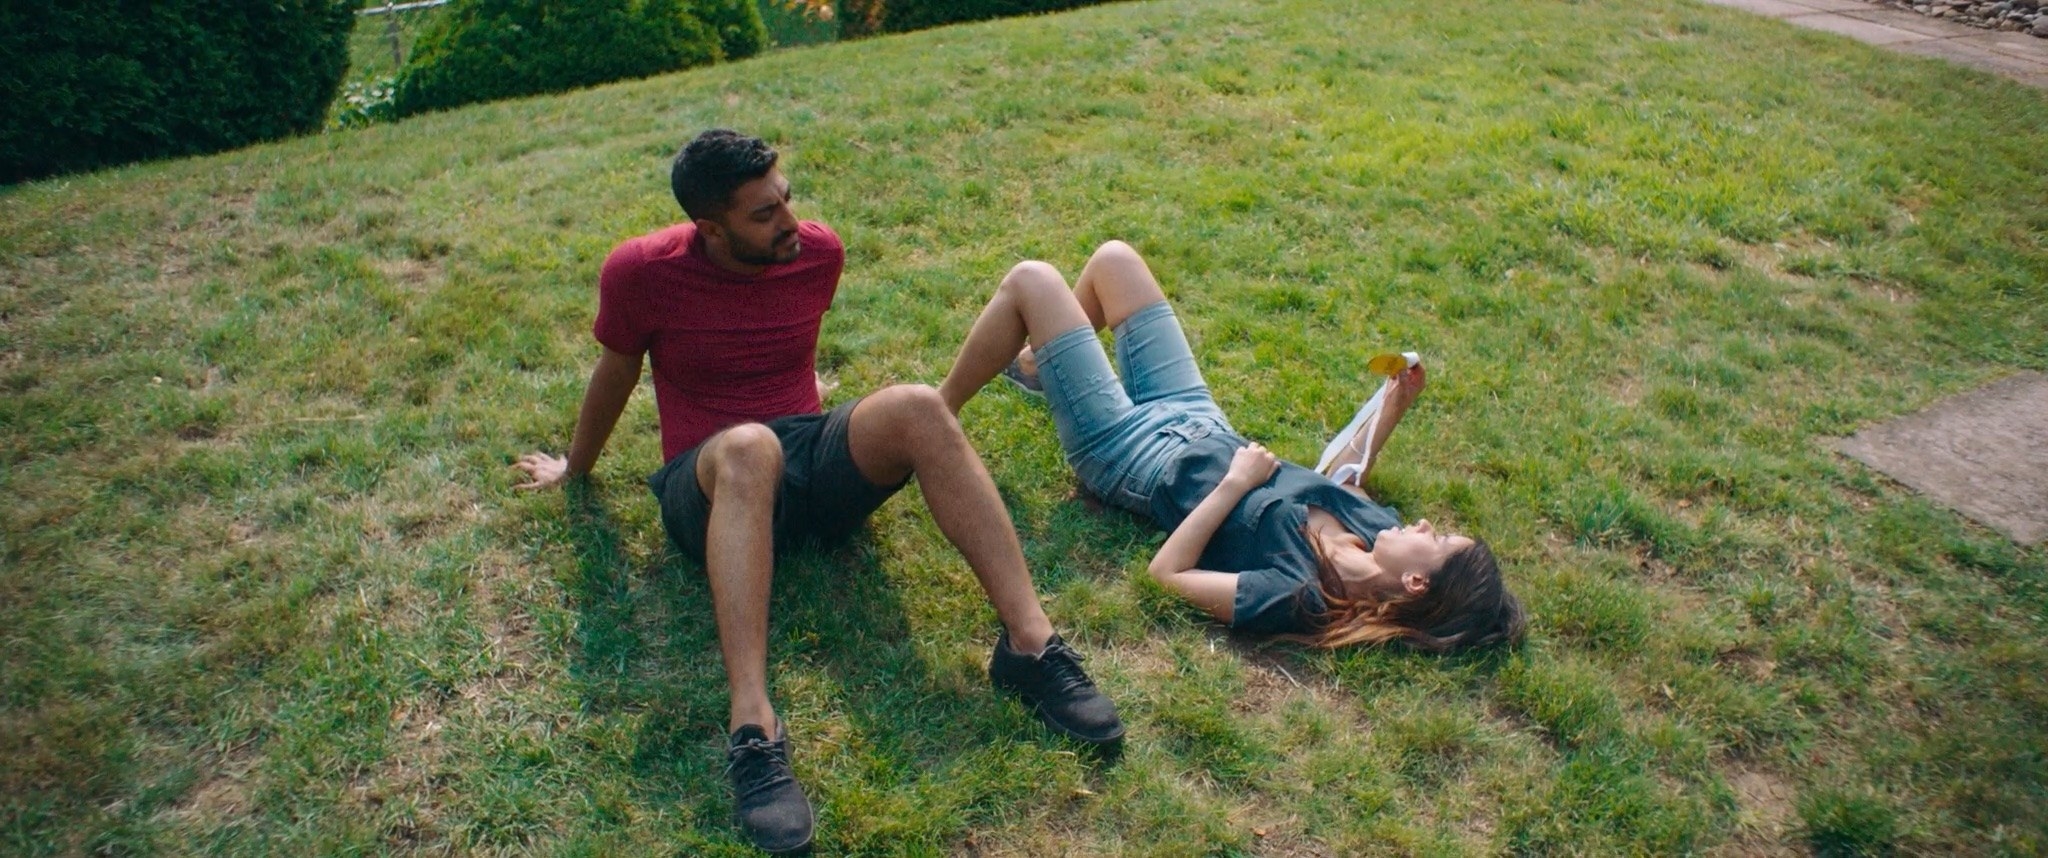 Sonny and Monica sitting in grass in Definition Please